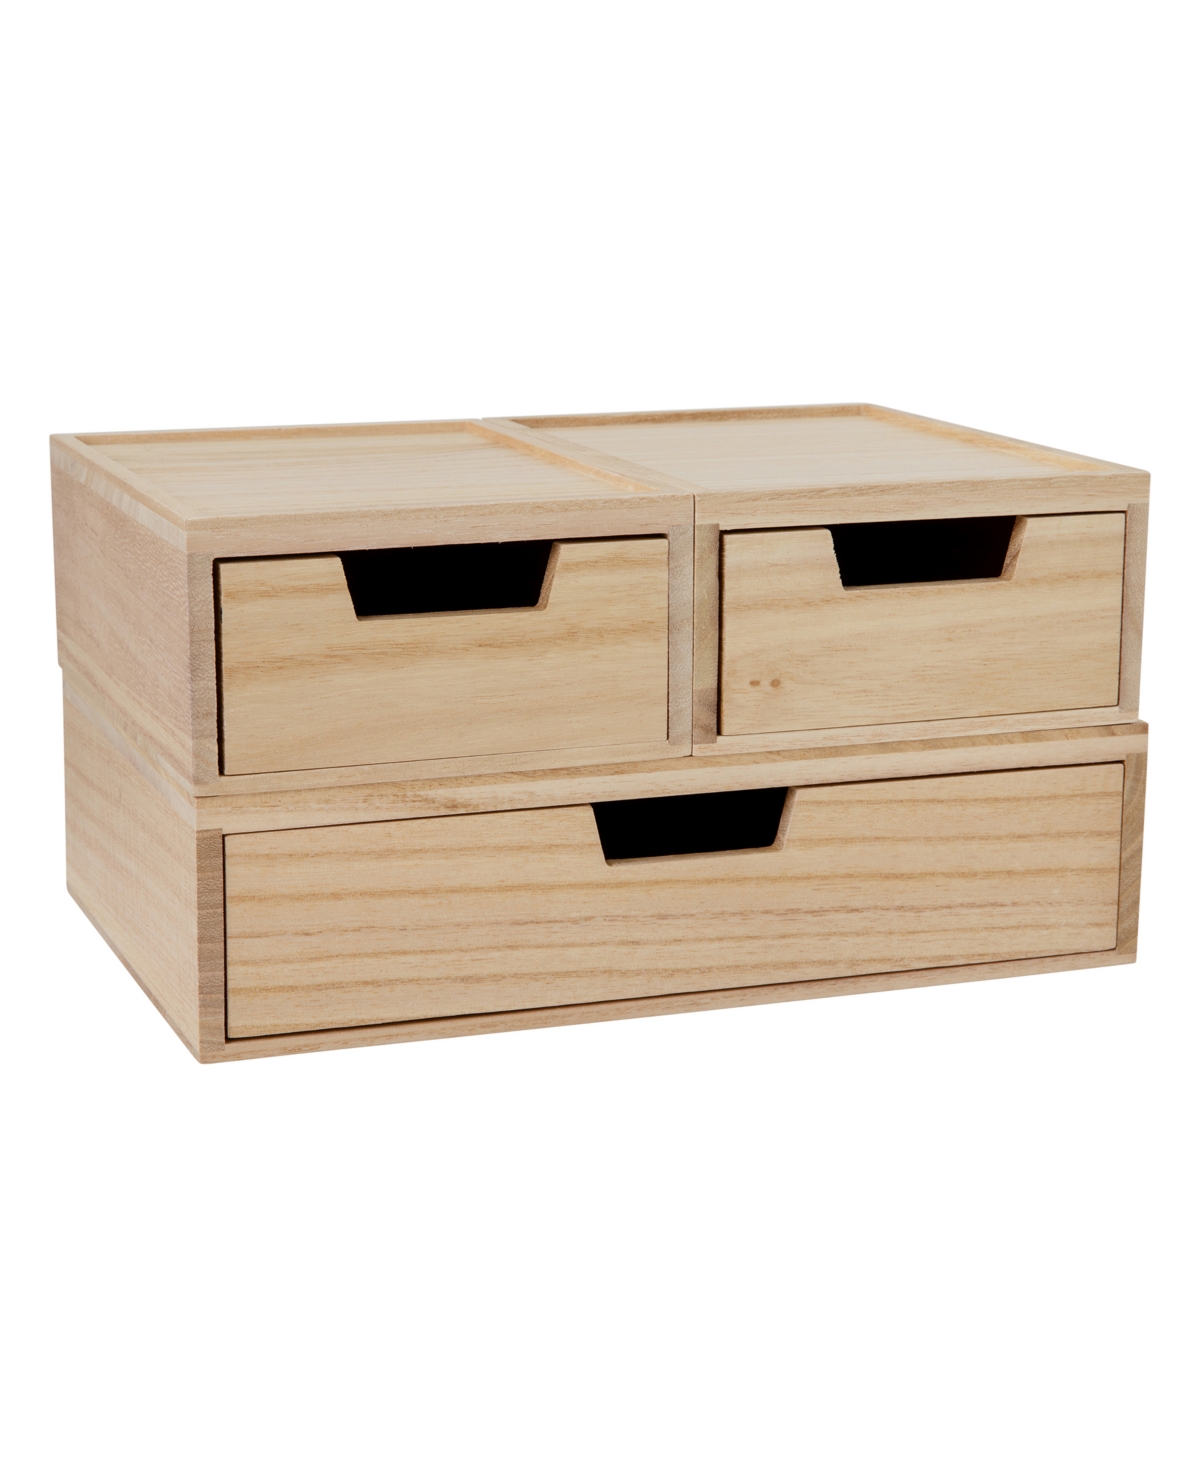 Weston Stackable Paulownia Wood Boxes with Drawers, Office Desktop Organizers, 3 Compartments - Light Natural